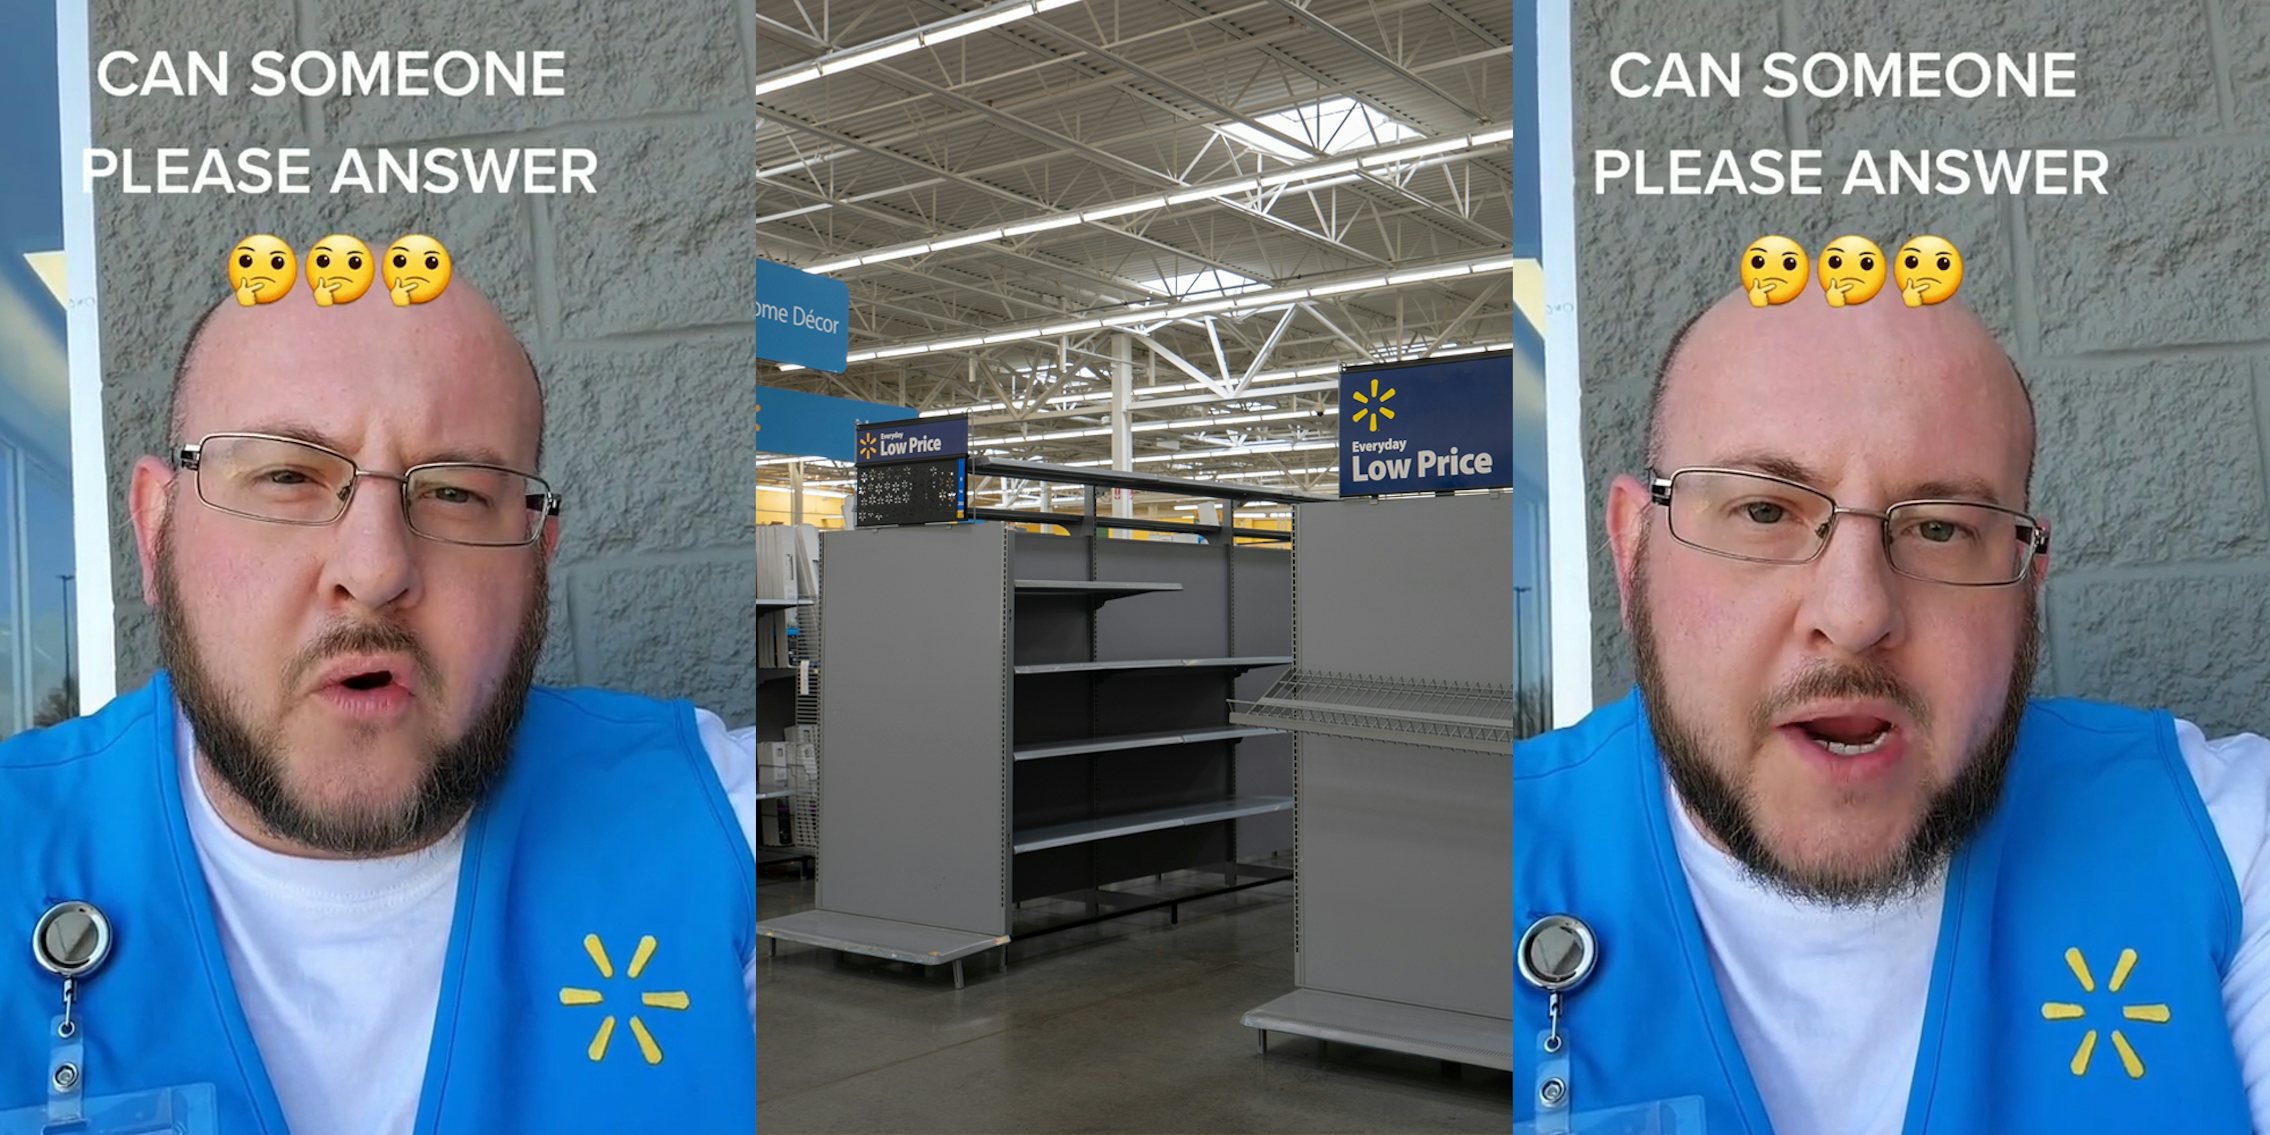 Walmart employee speaking with caption 'CAN SOMEONE PLEASE ANSWER' (l) Walmart empty shelves (c) Walmart employee speaking with caption 'CAN SOMEONE PLEASE ANSWER' (r)